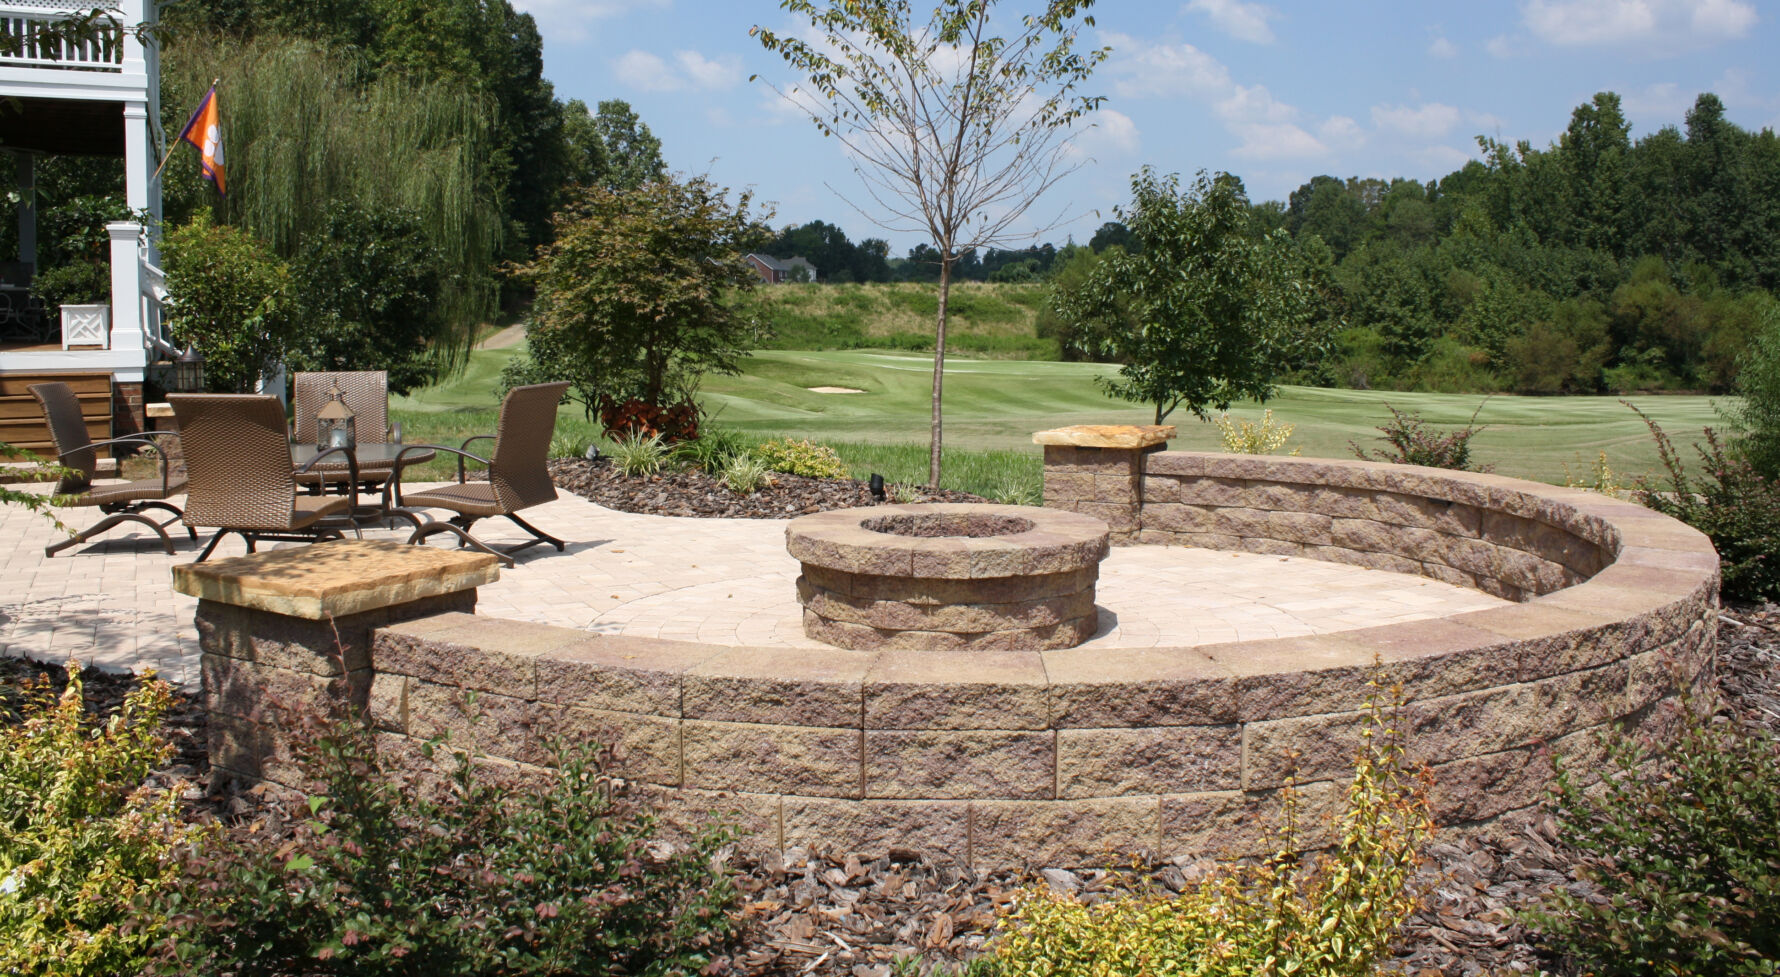 VERSA-LOK Segmental Retaining Wall and Fire Pit Kit supplied by Johnson Concrete Products